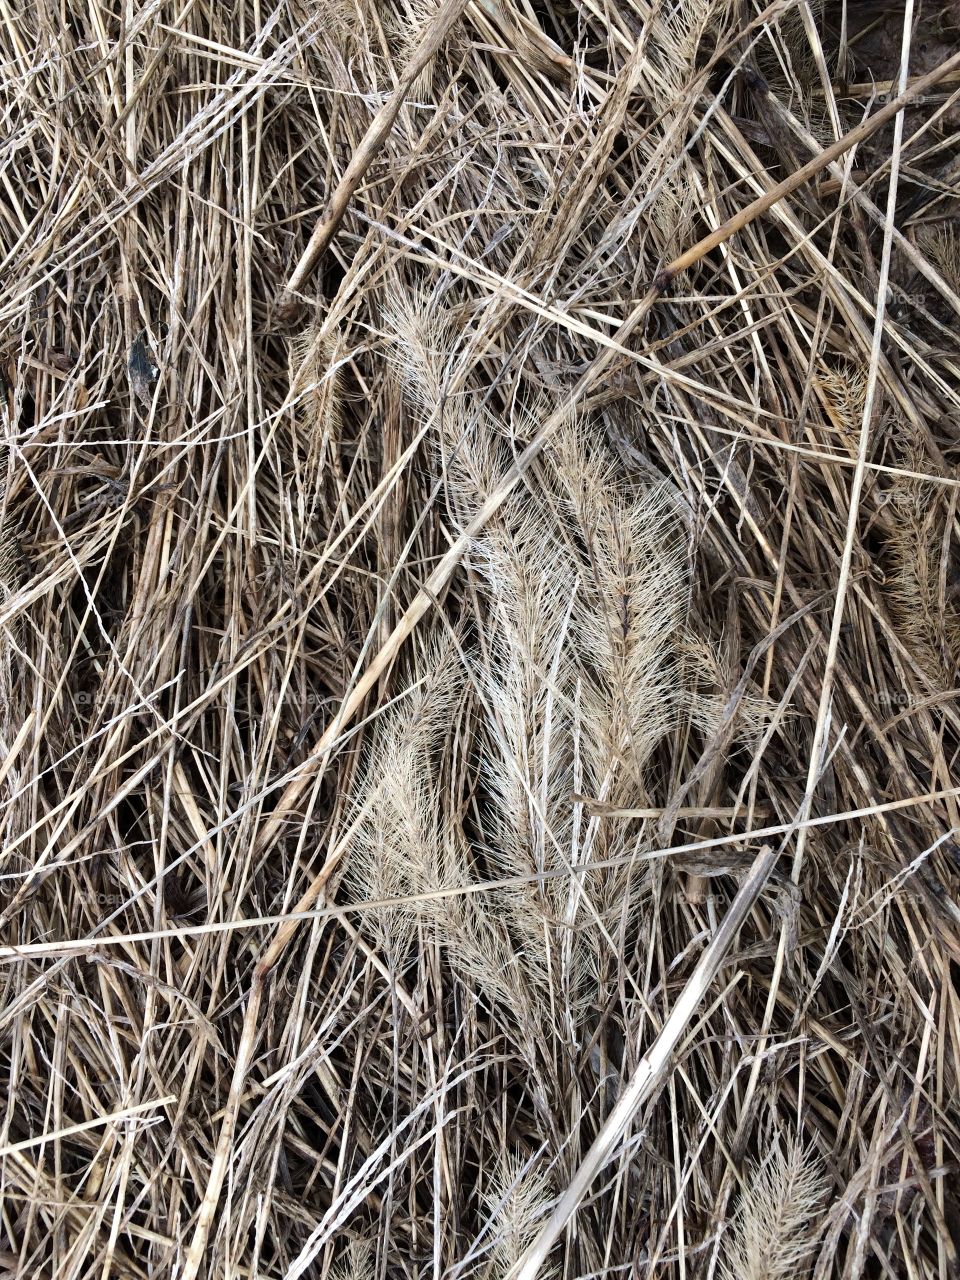 Stalks of grass seed lying on cut dry brown grass